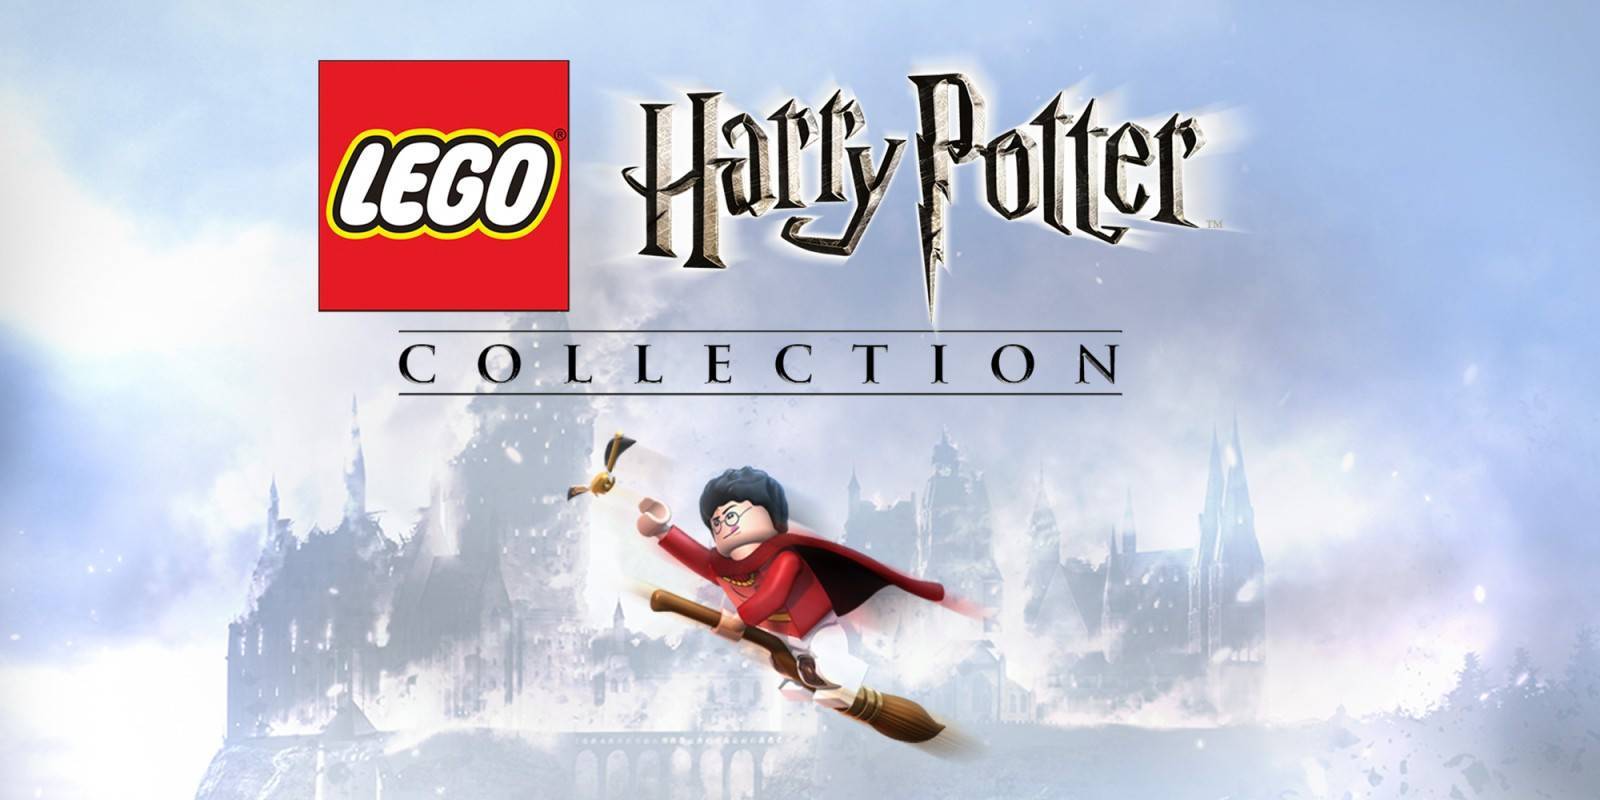 LEGO Harry Potter Collection cheap - Price of